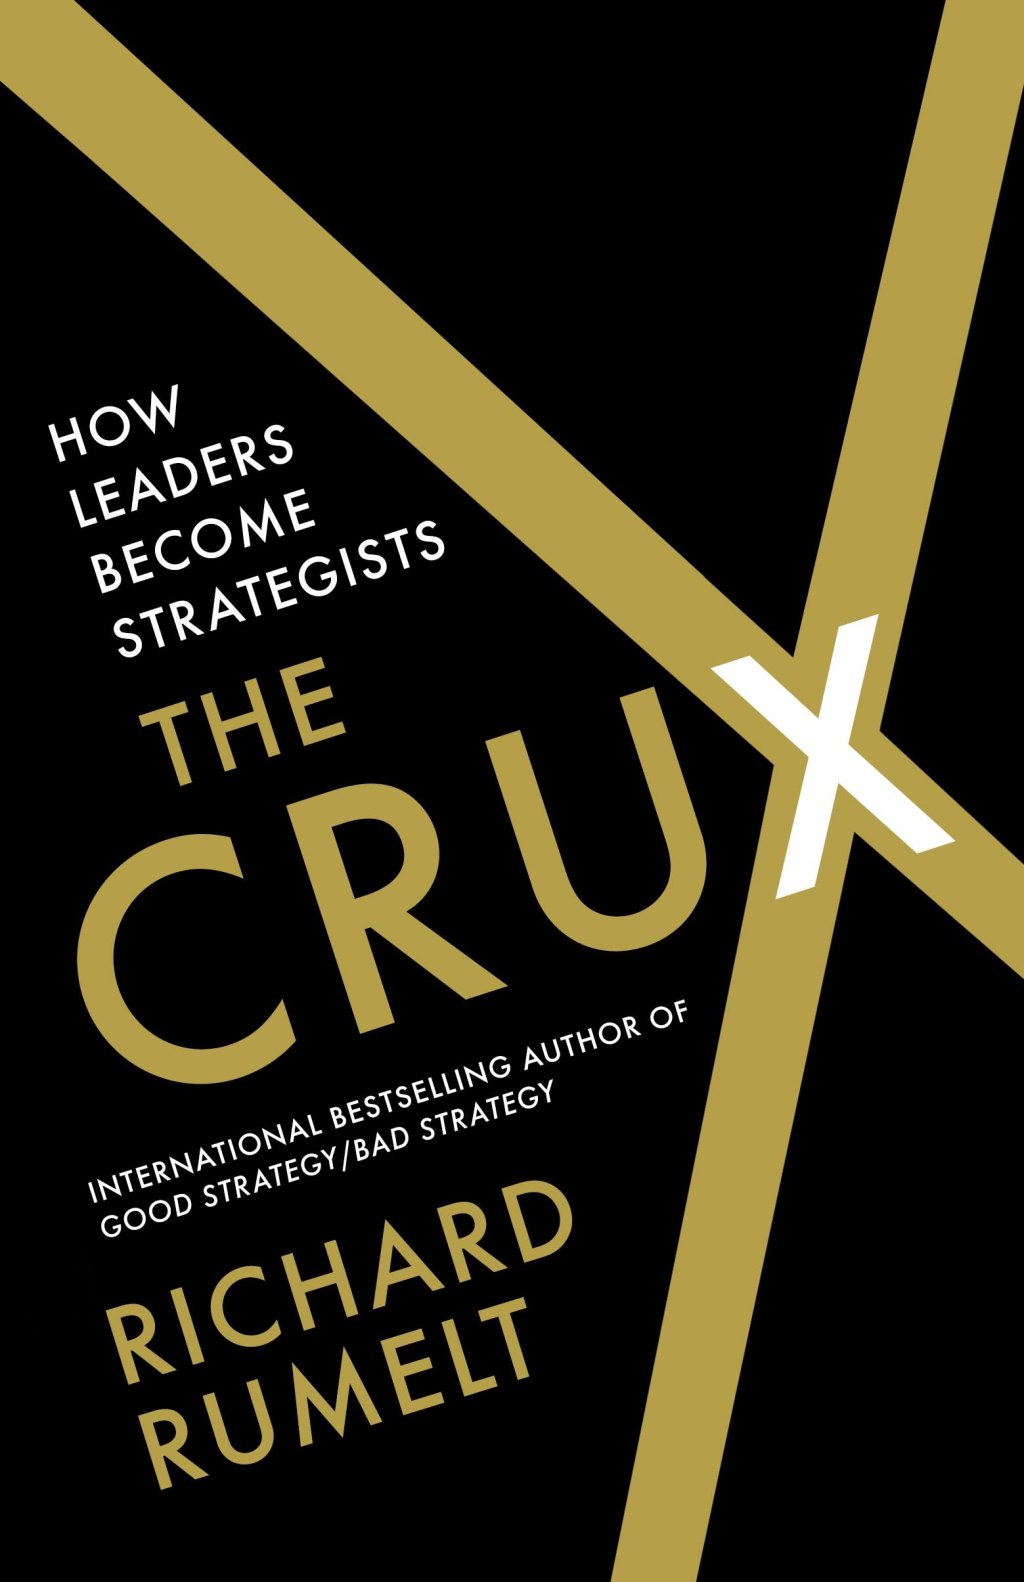 “The Crux” (Book Review)